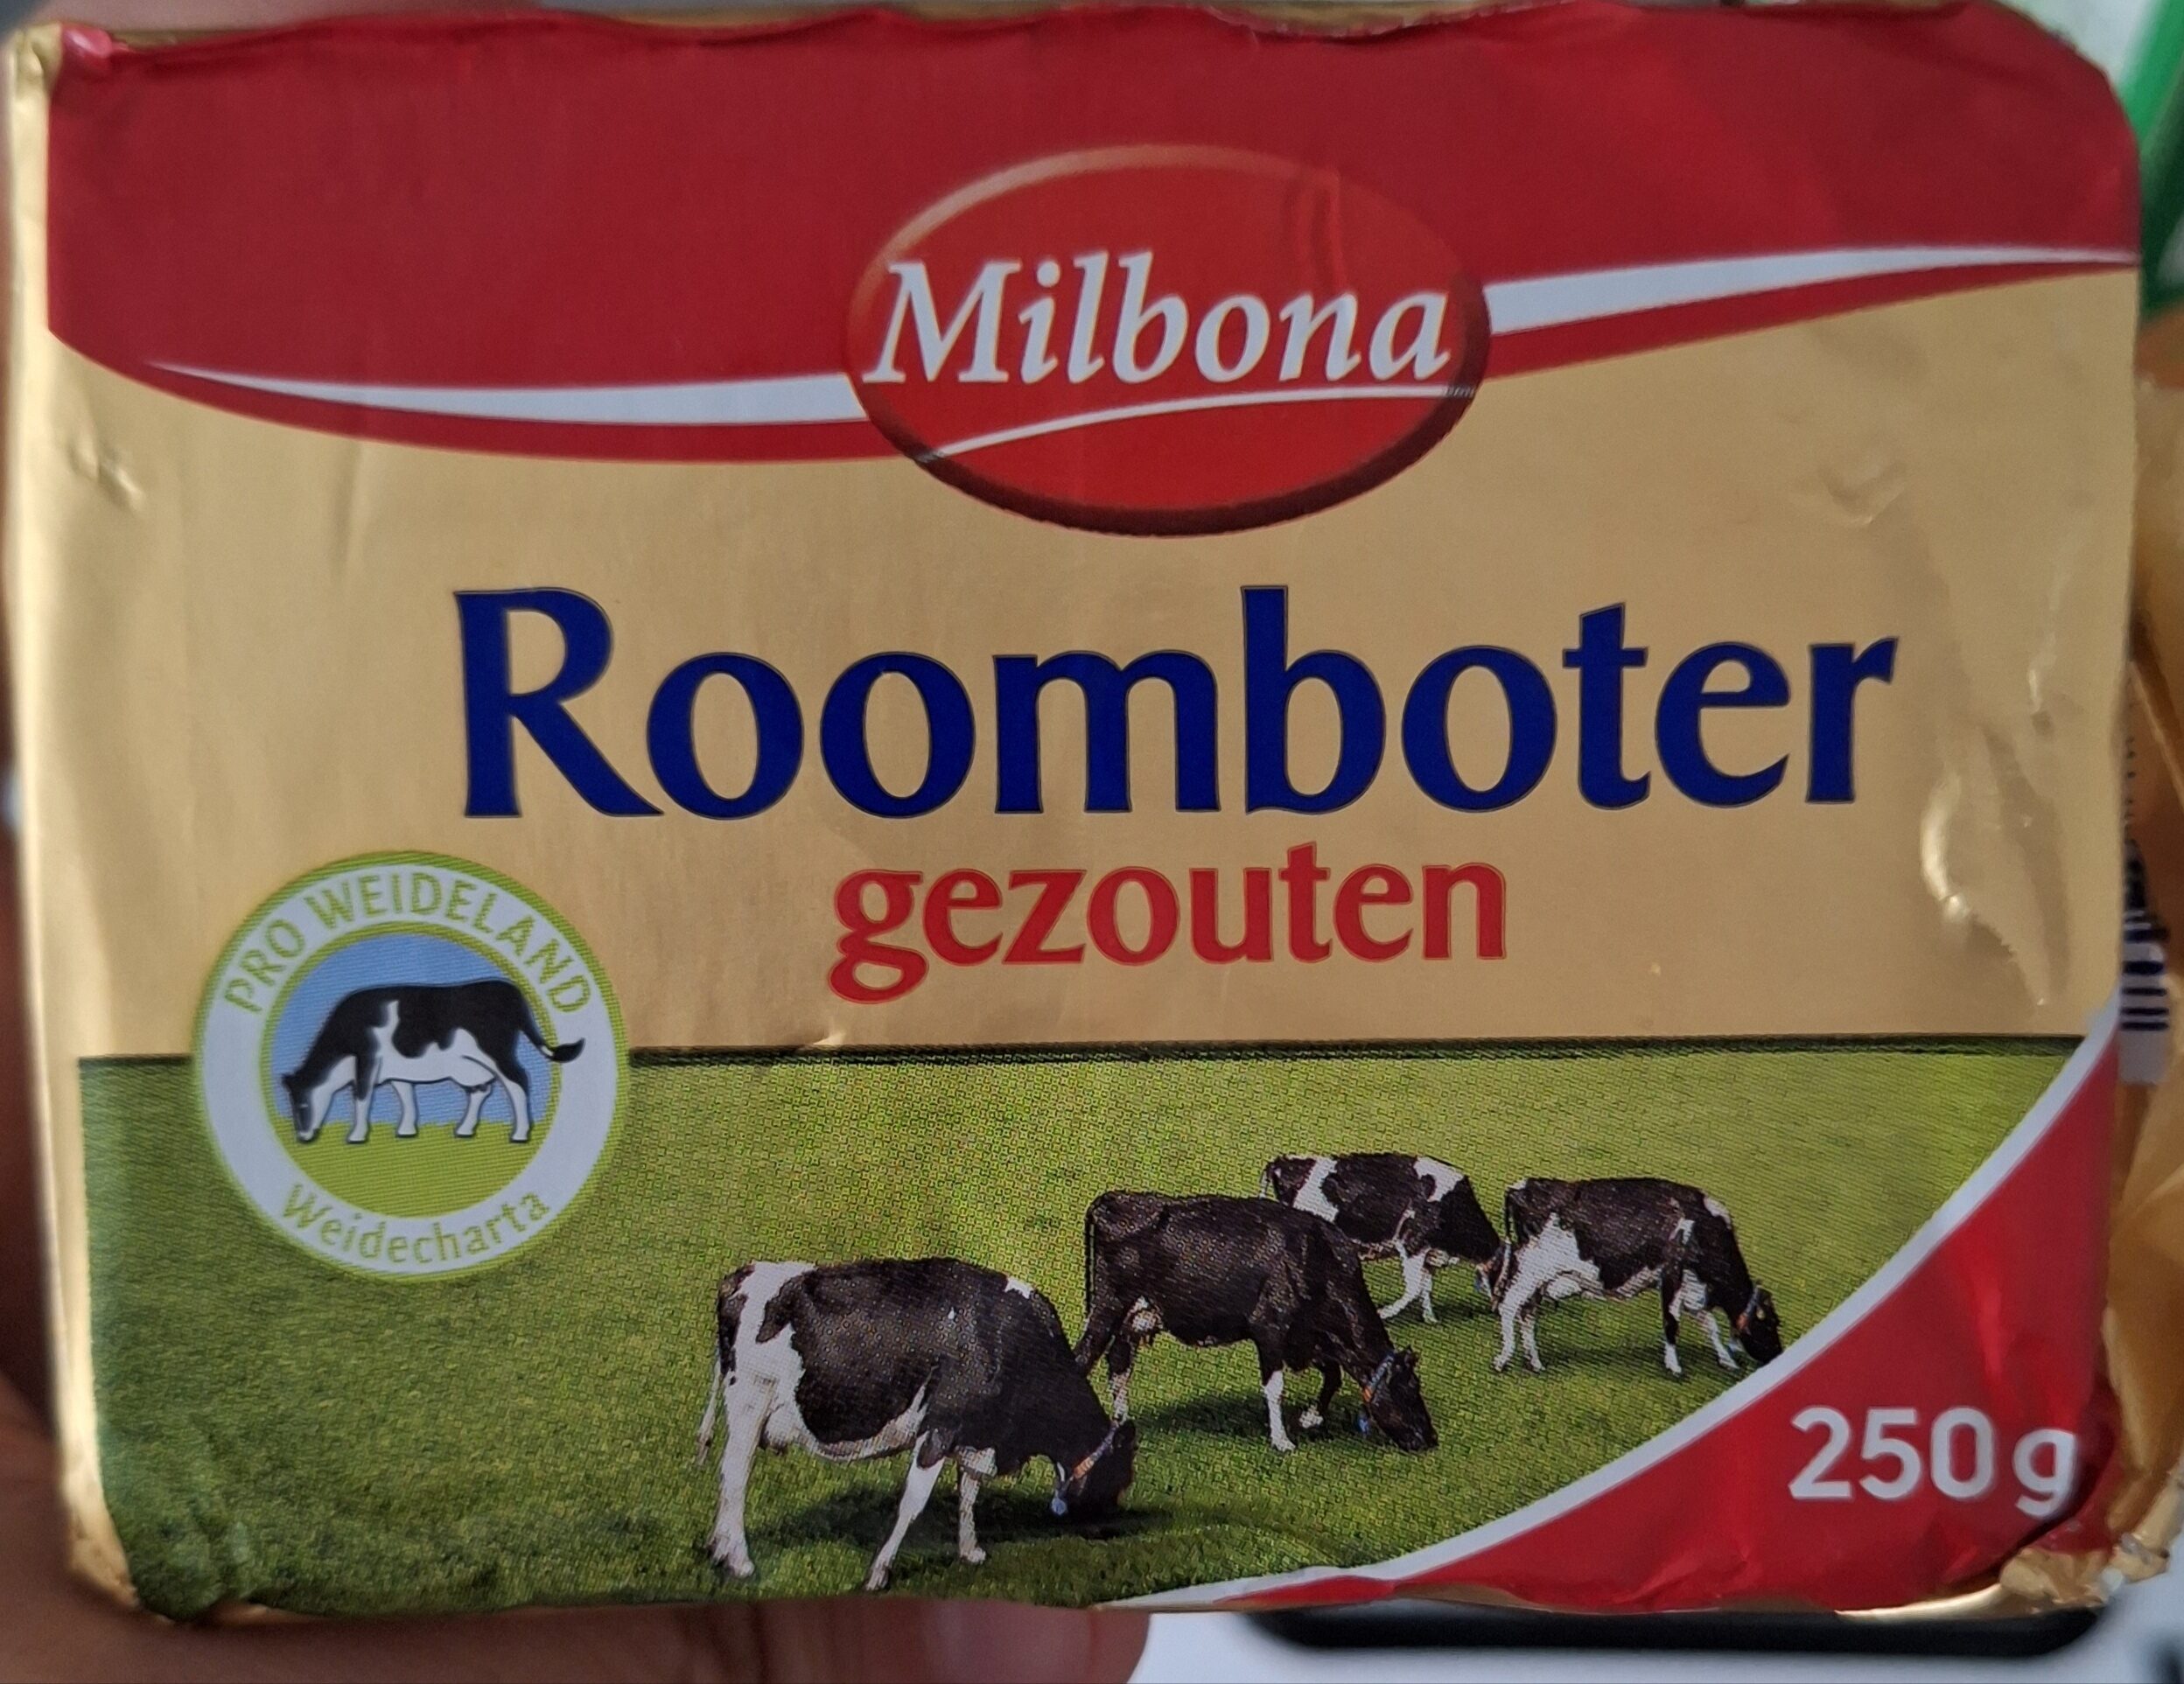 Roomboter - Product